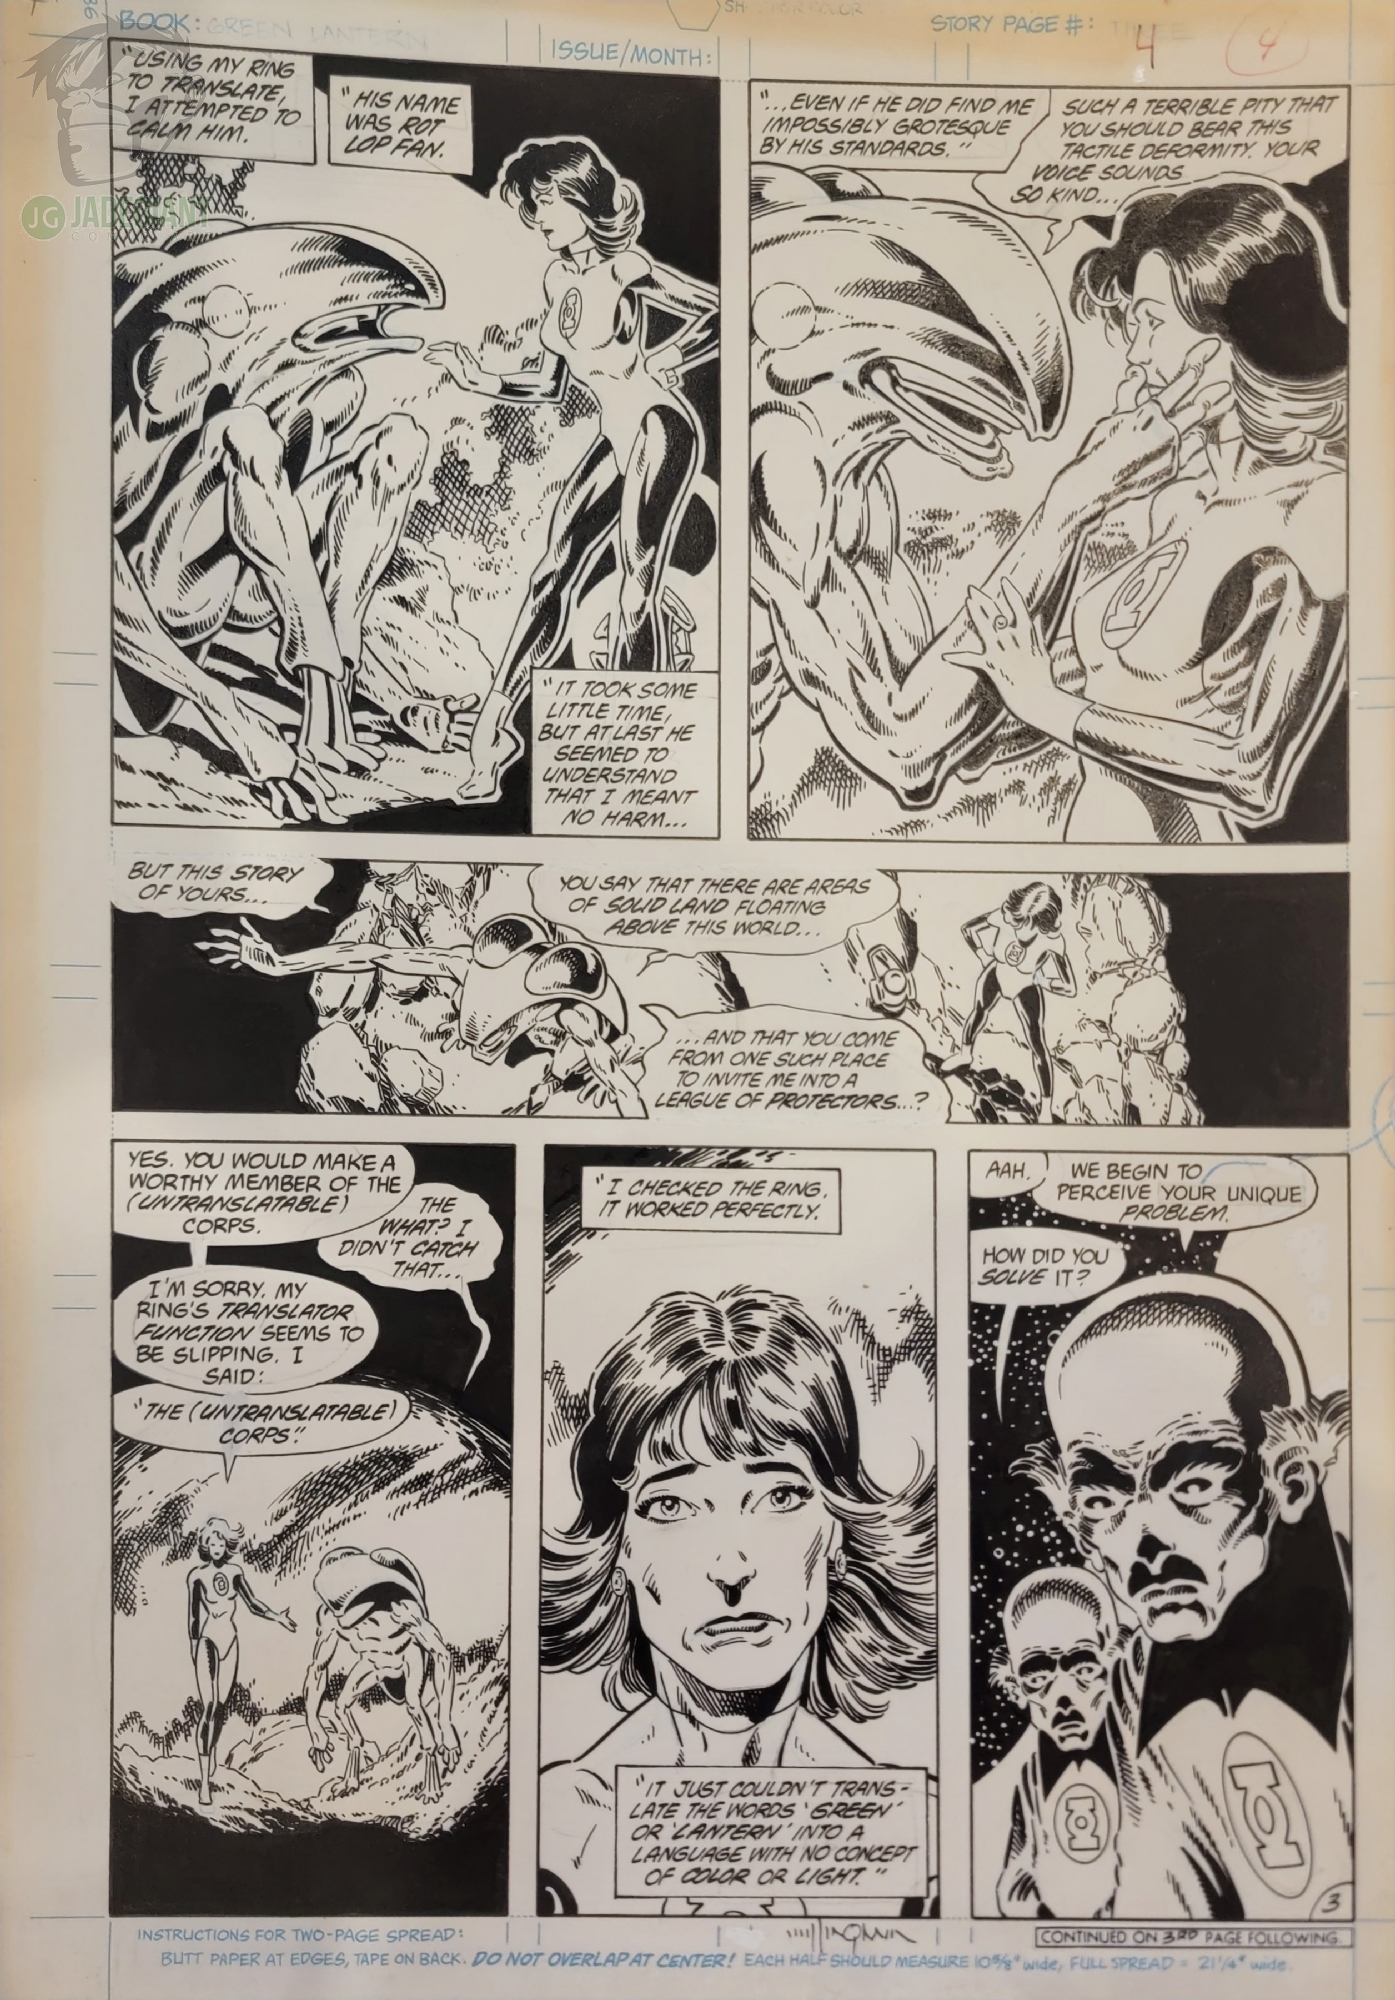 1987 Tales of the Green Lantern Corps Annual 3 page 3 by Bill Willingham and Tery Austin first appearance of Rot Lop Fan Comic Art